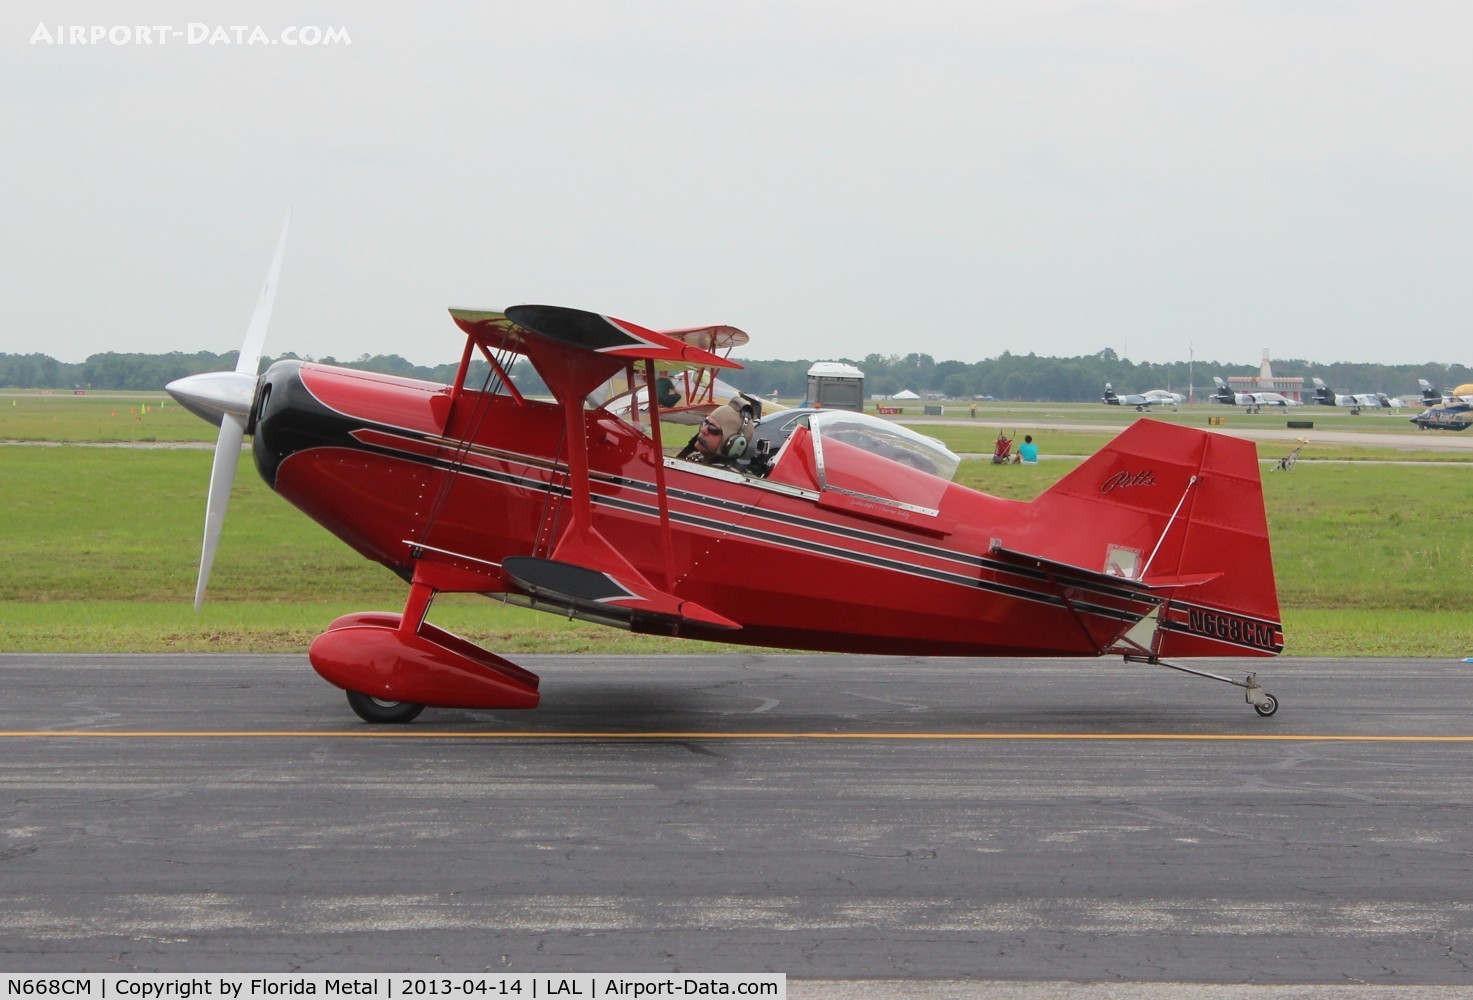 N668CM, 2013 Pitts S-1 Special C/N 068, Pitts